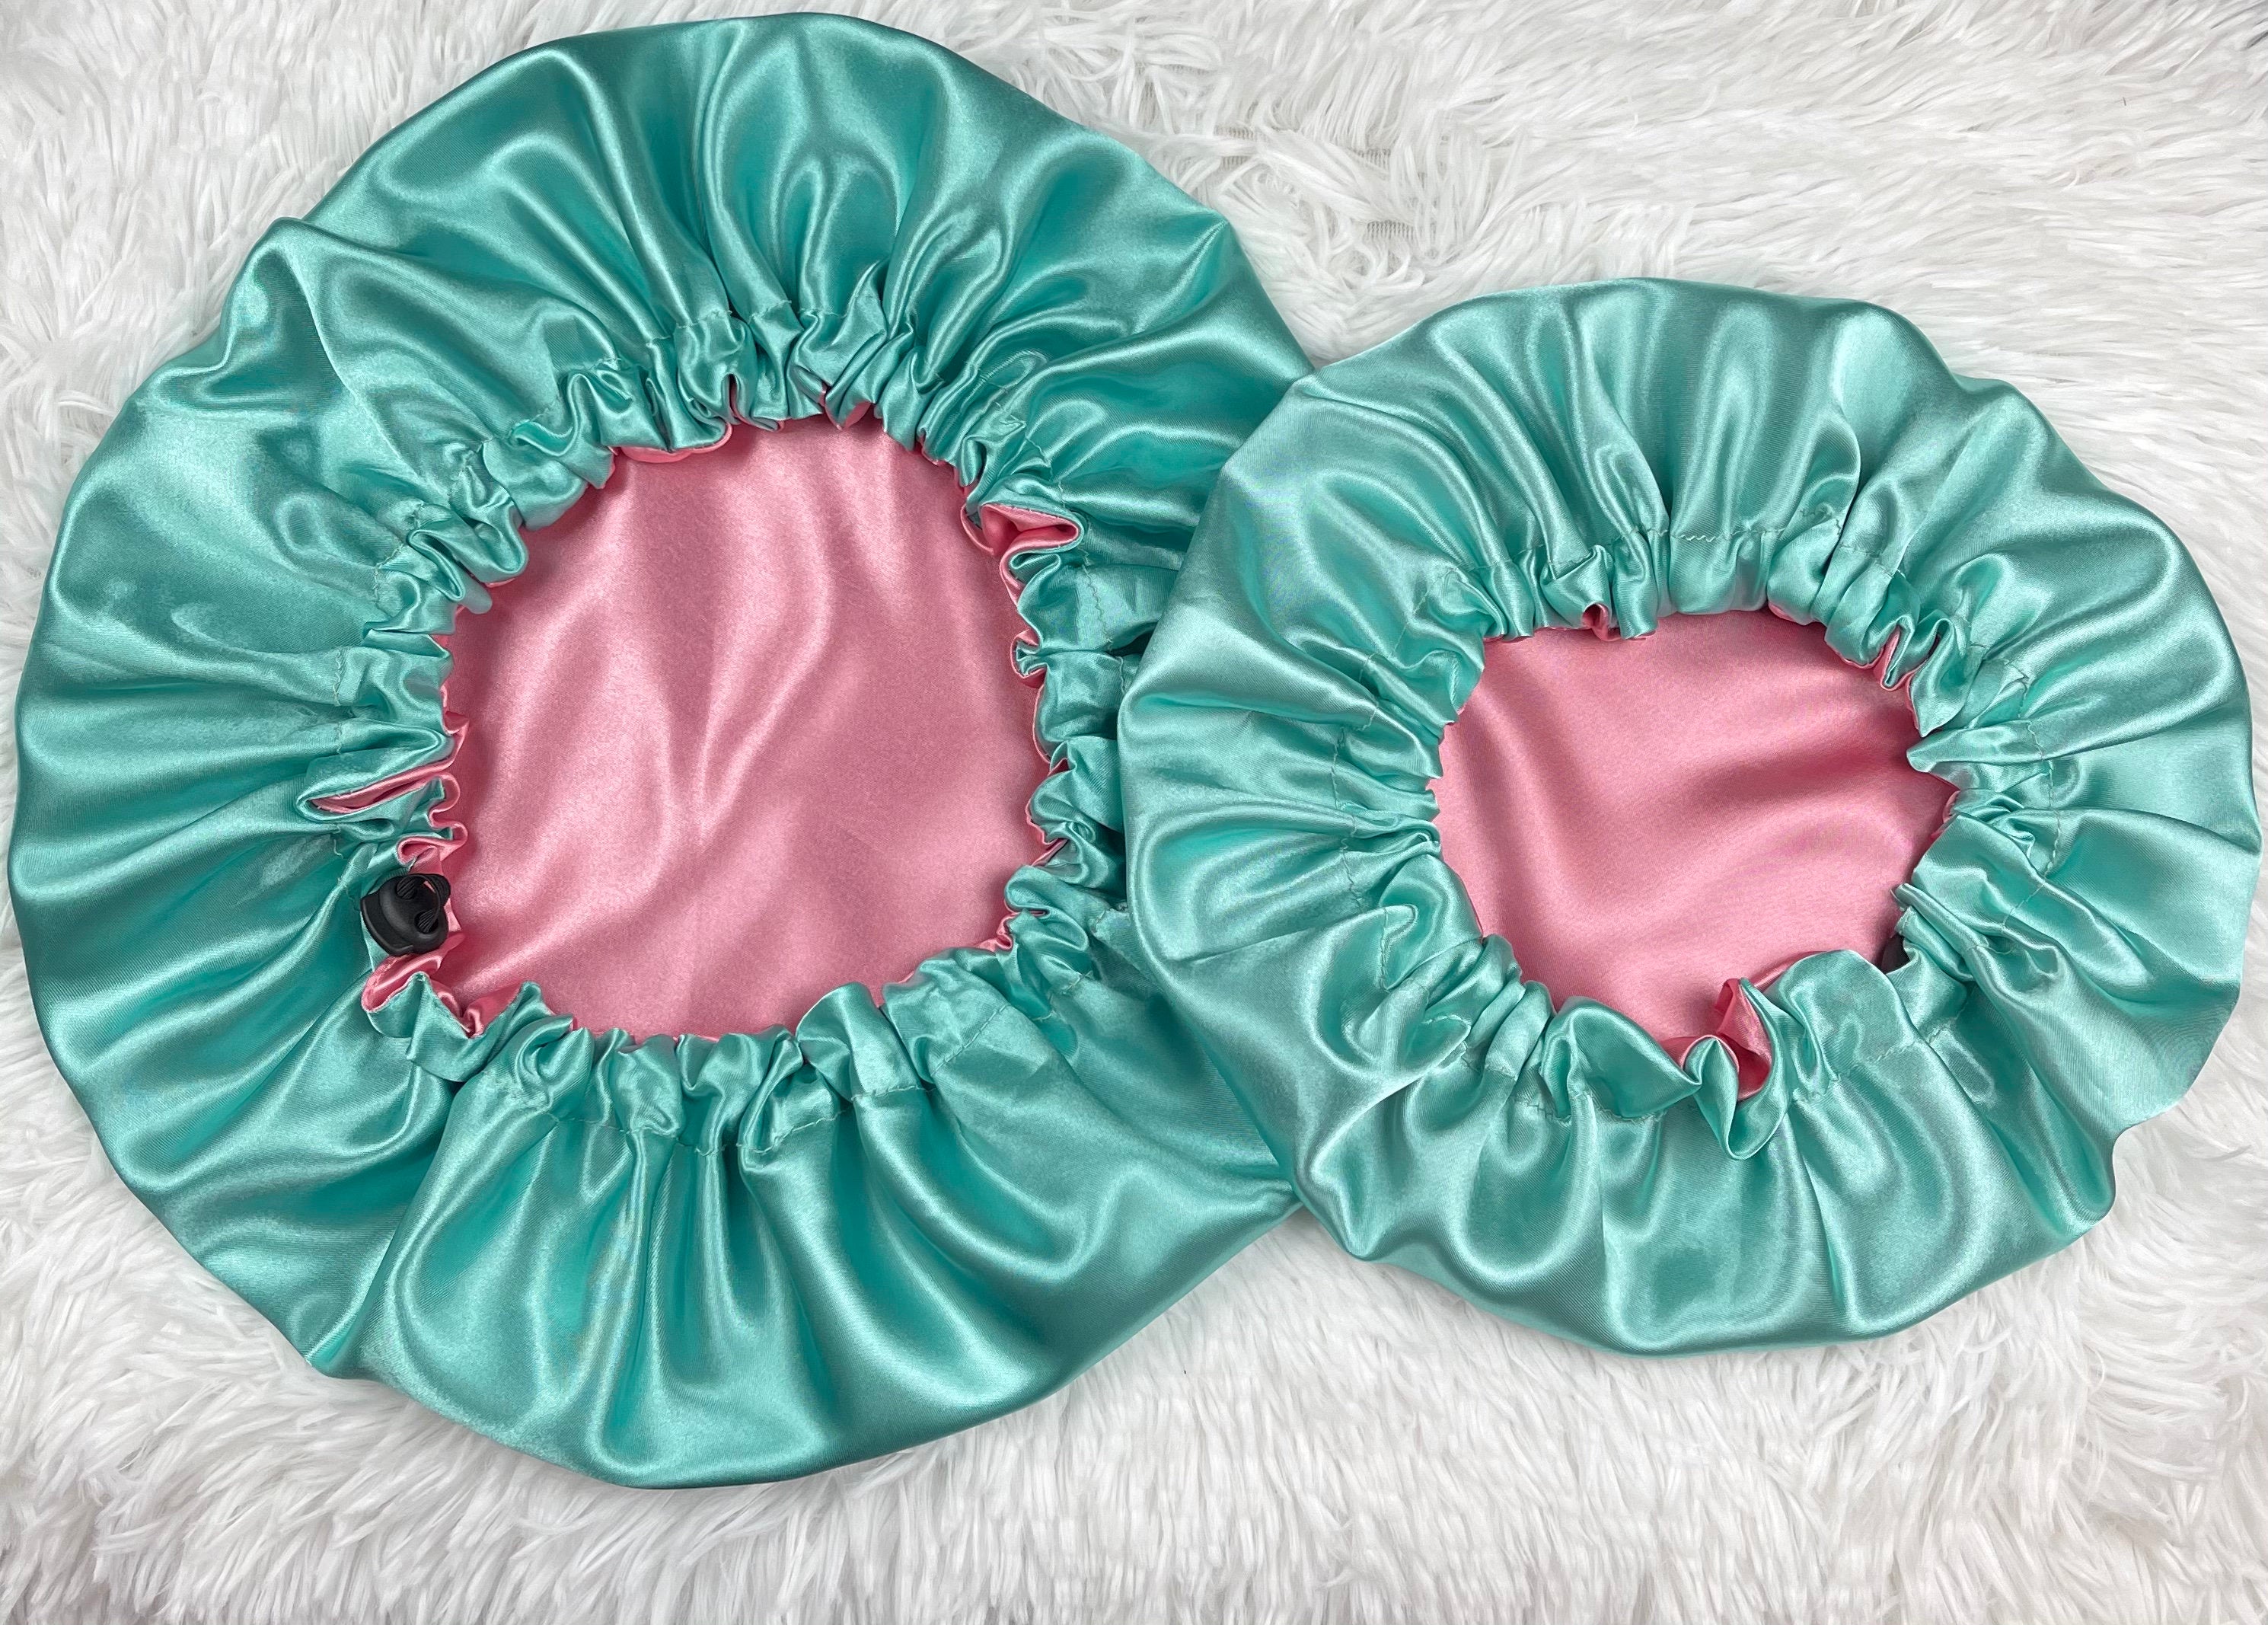 Adult Size Reversible Satin Bonnet With Elastic or Drawstring